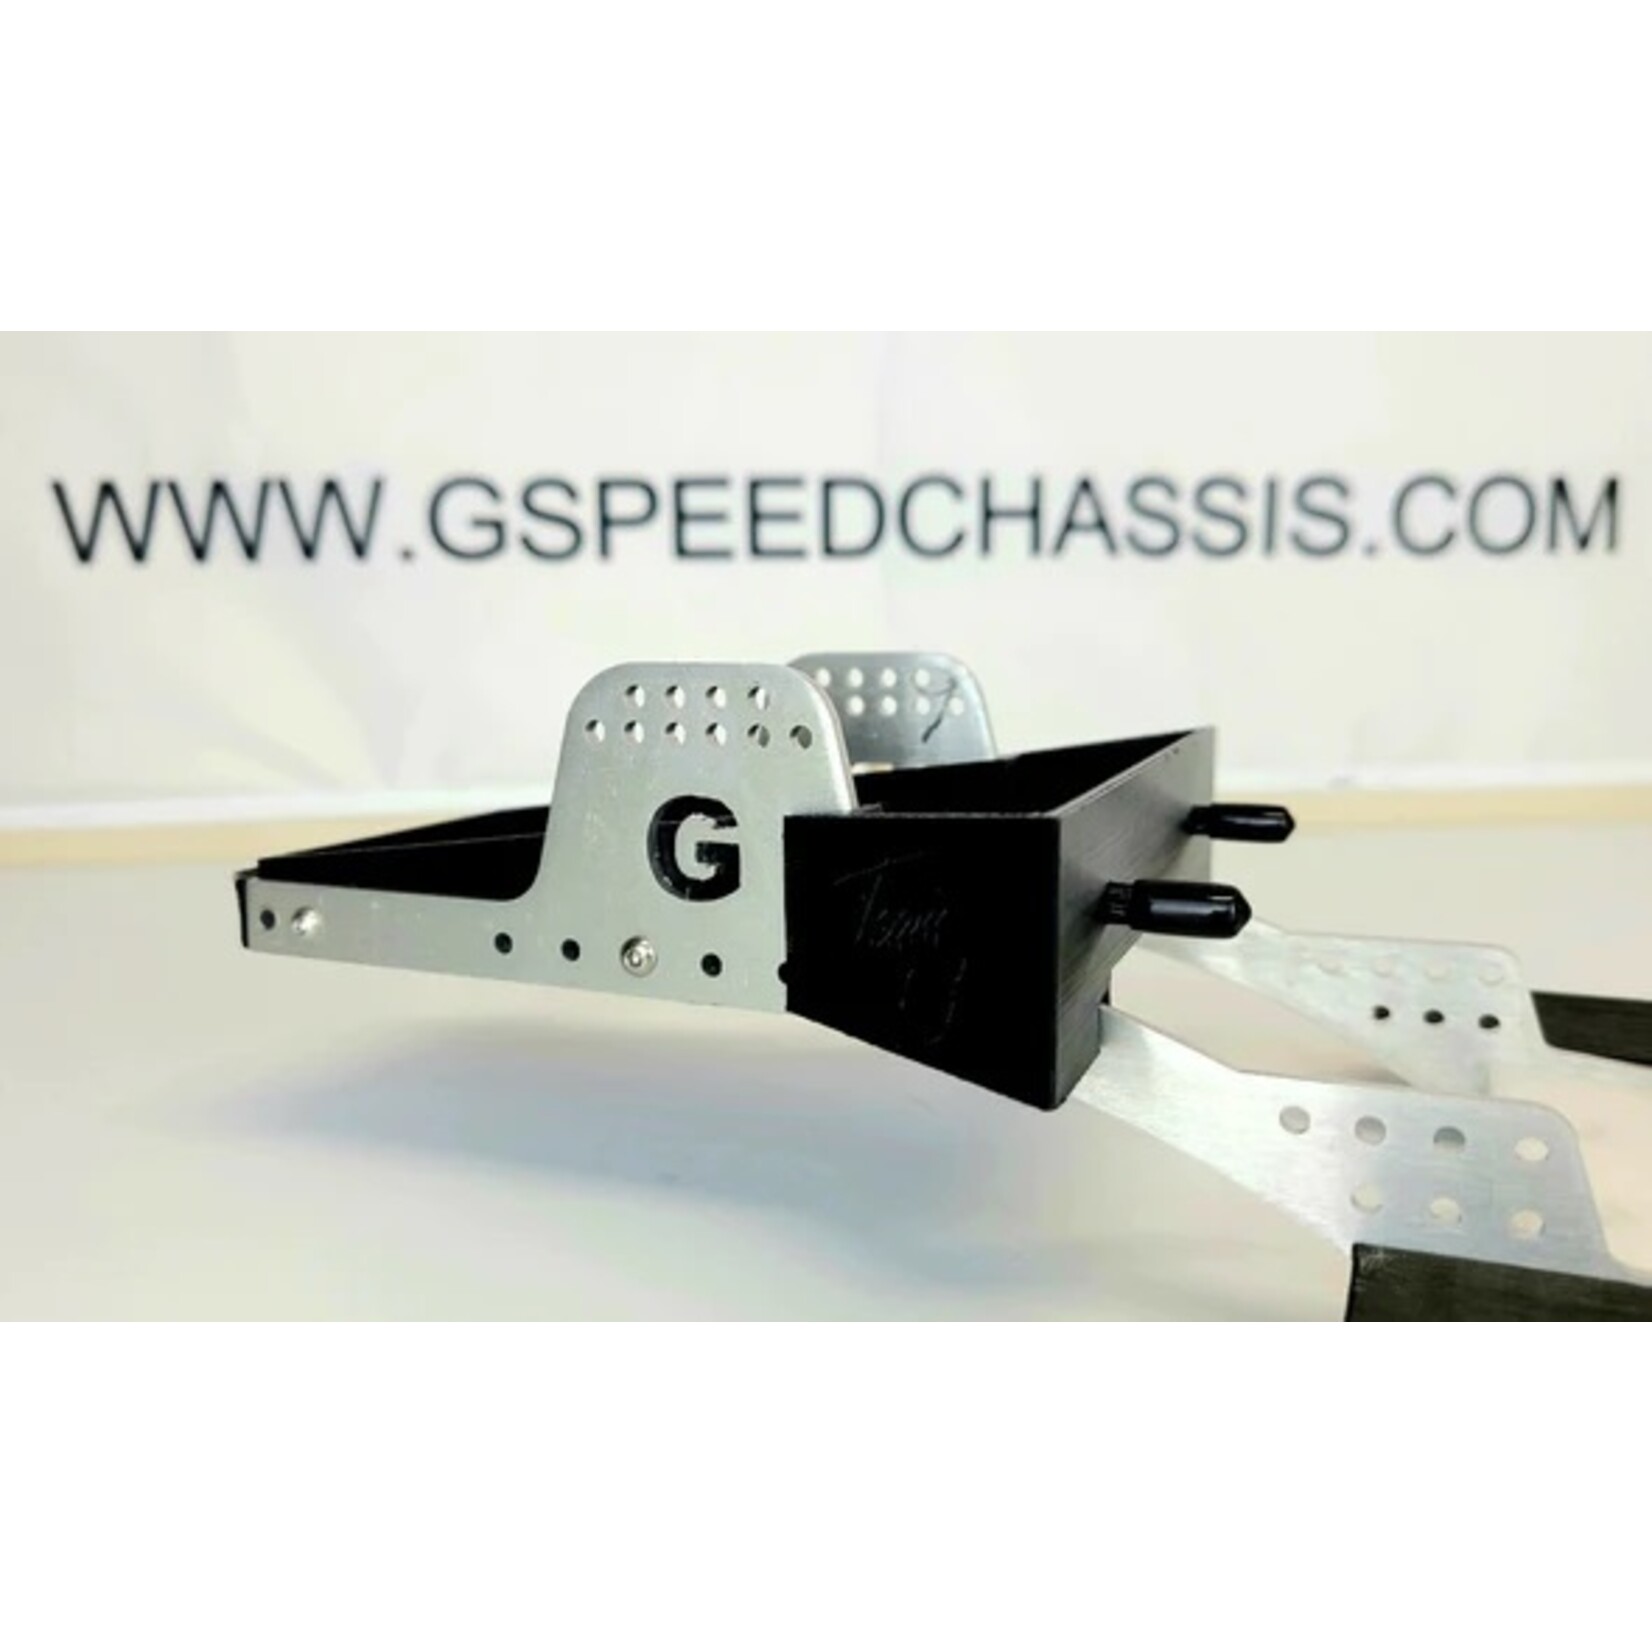 Team G-Speed GSPEED TGH-V3 Chassis G-Bed Cheater Drop Bed #G-BED